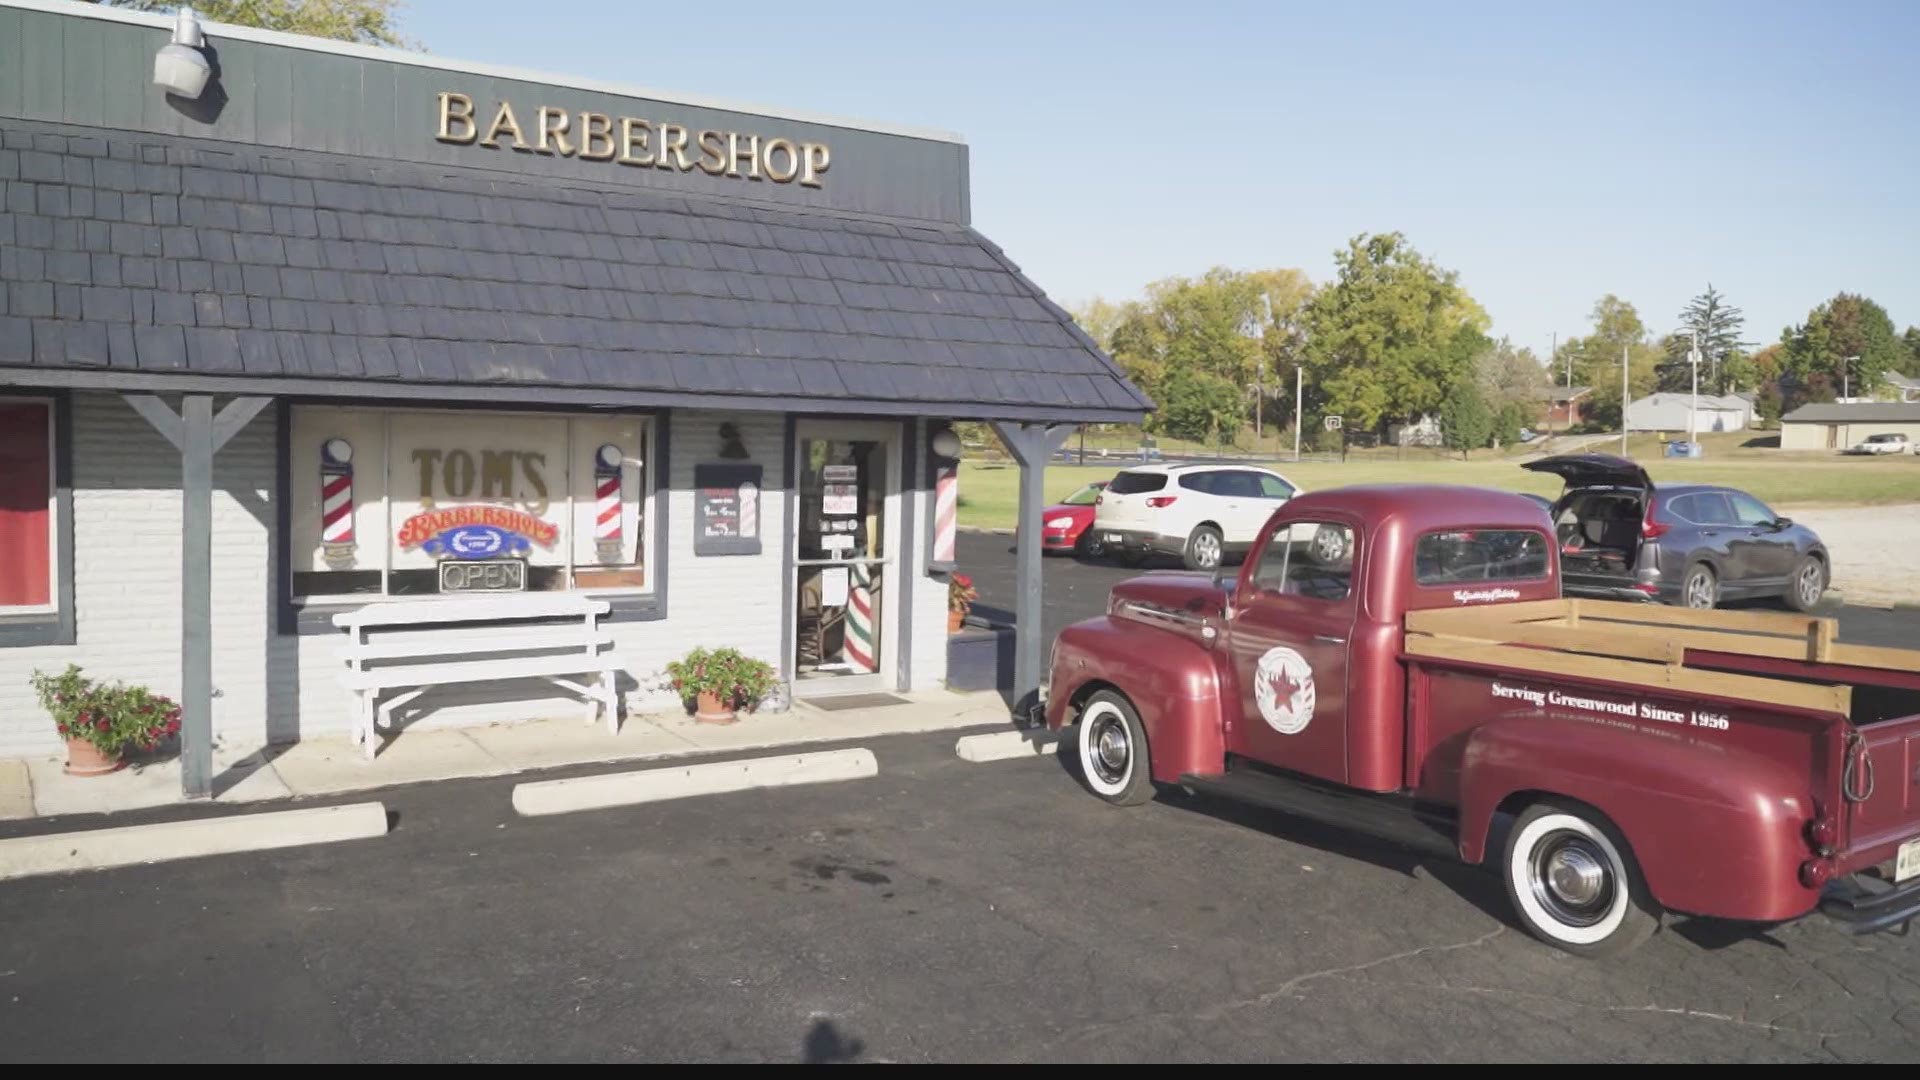 Tom's Barbershop in Greenwood has been open for more than 65 years.